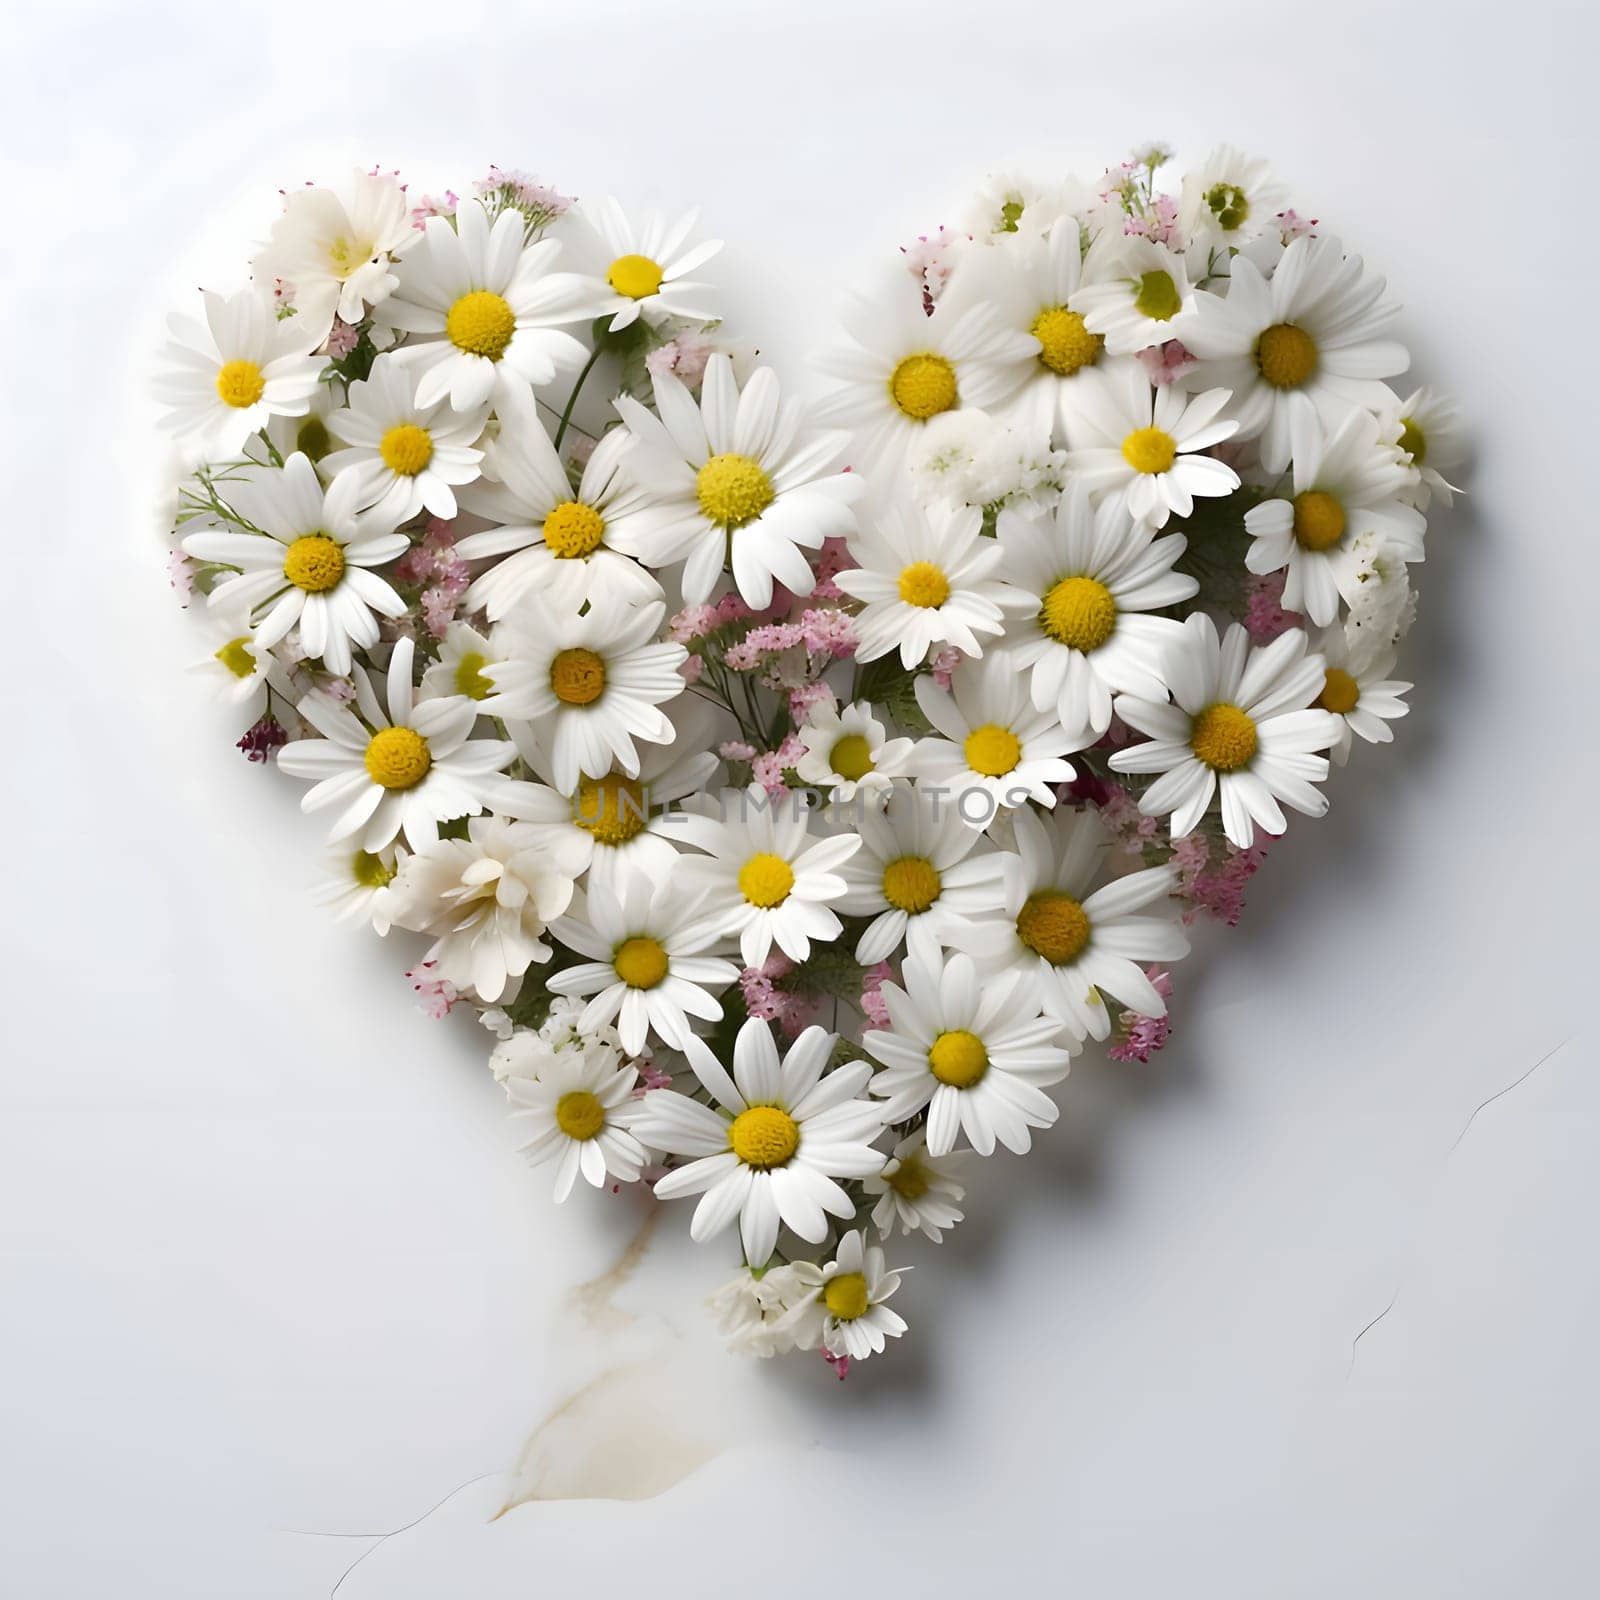 Heart arranged with white daisy flowers. Heart as a symbol of affection and love. by ThemesS